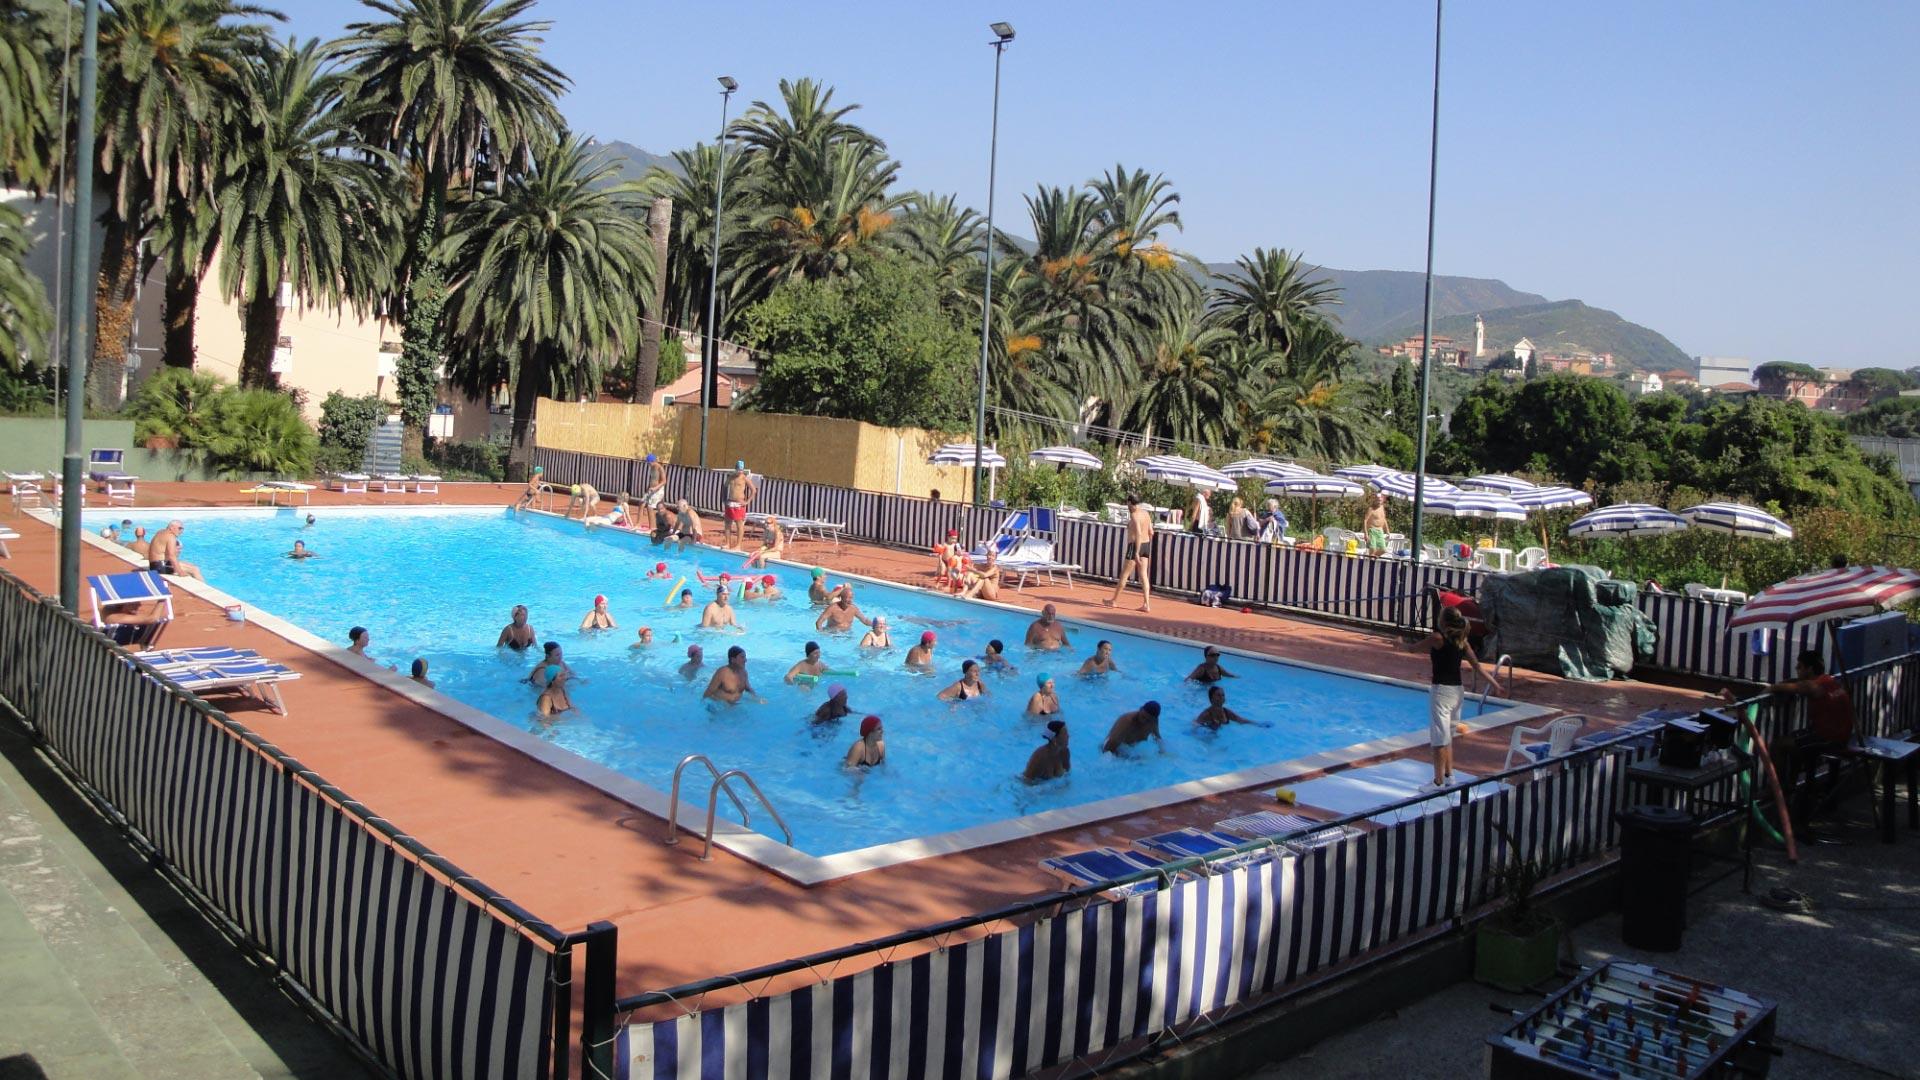 Outdoor pool with people swimming, surrounded by palm trees.